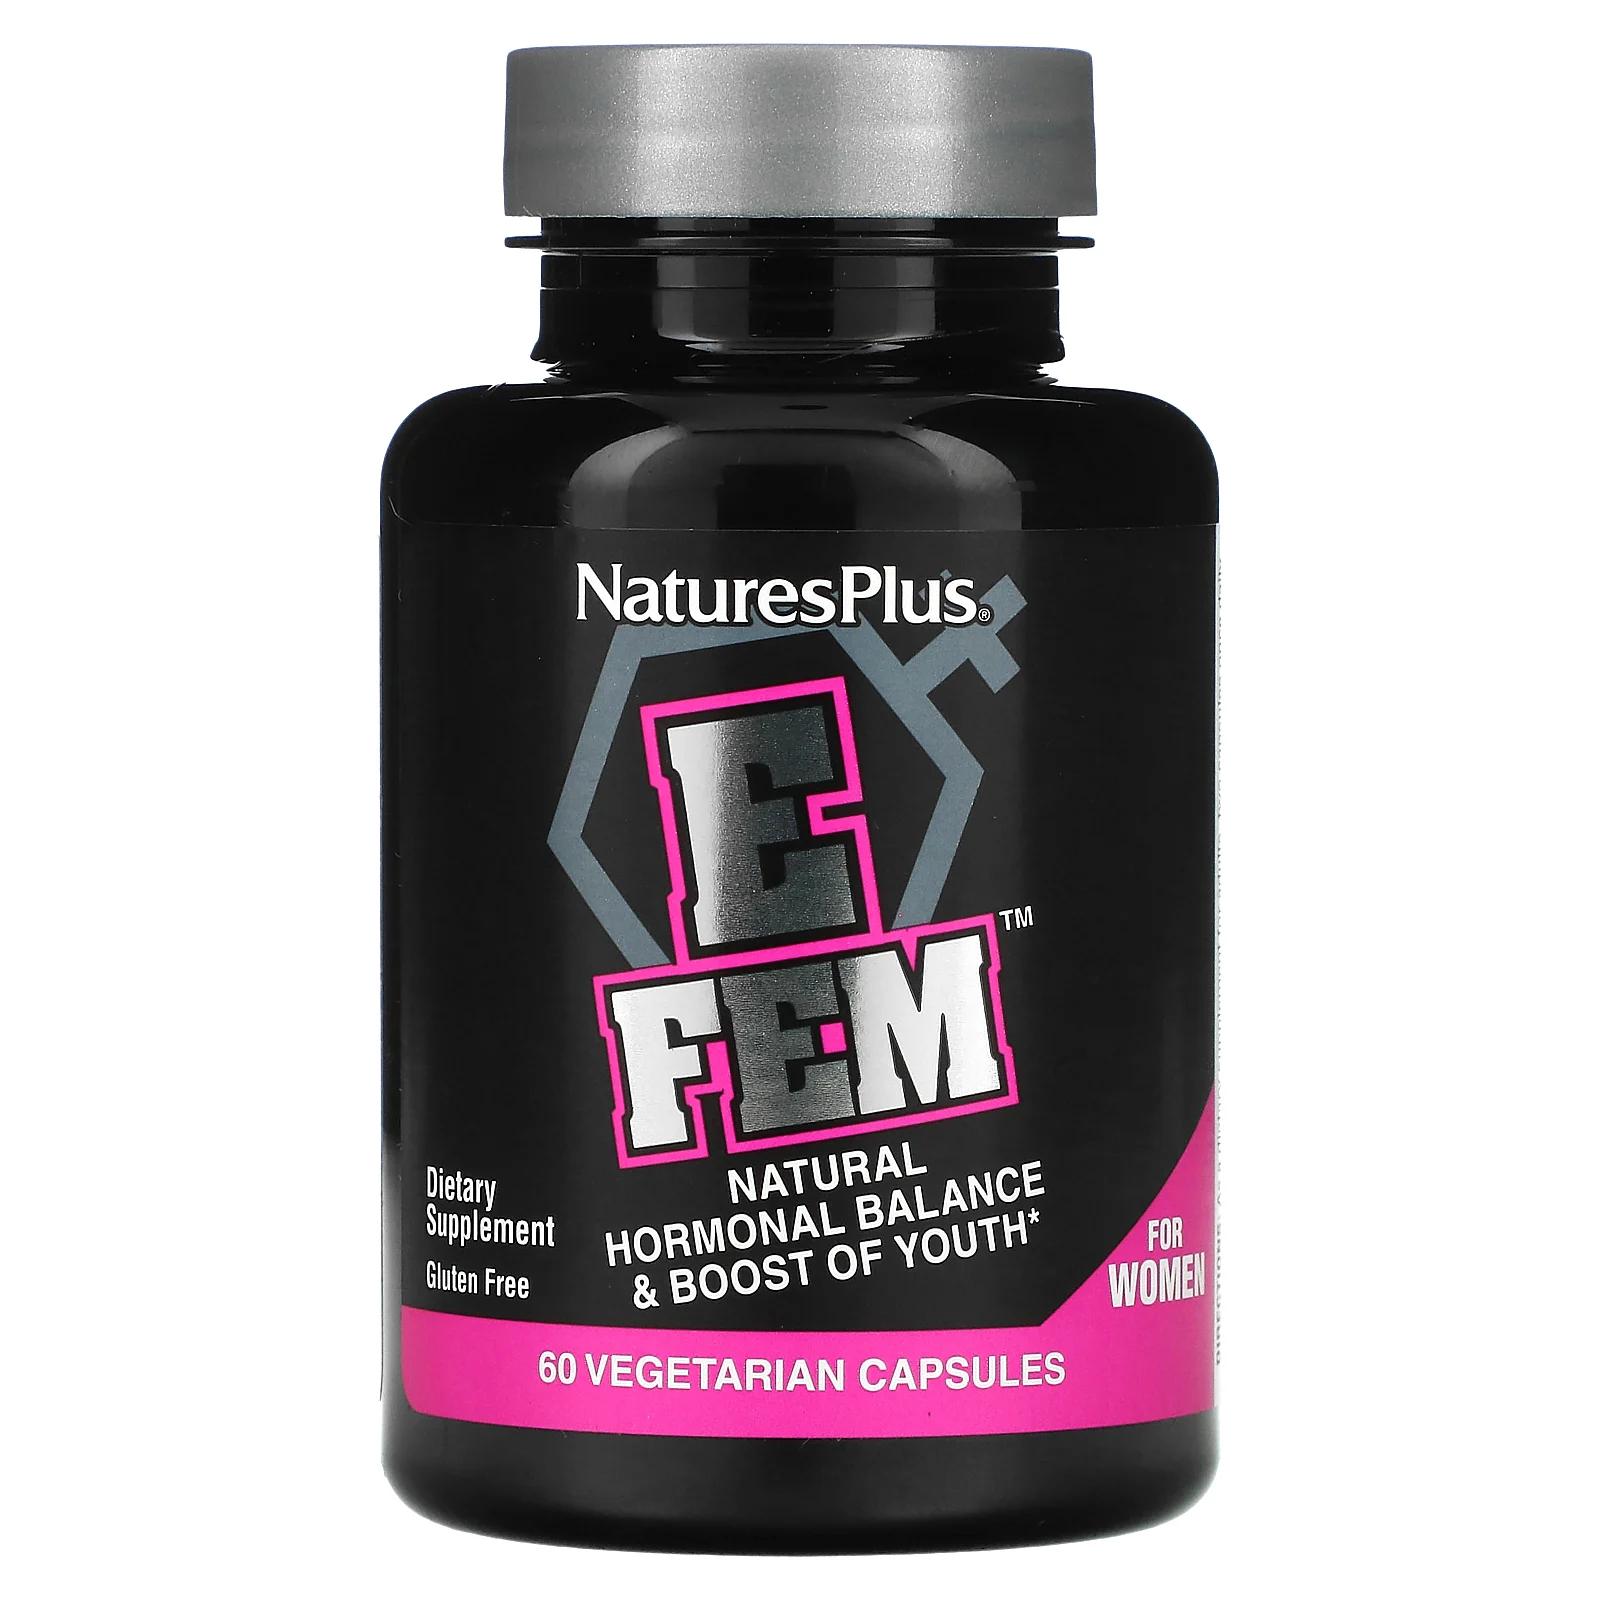 Nature's Plus E Fem for Women Natural Hormonal Balance & Boost of Youth 60 Vegetarian Capsules natural balance great curves 60 vegetarian capsules